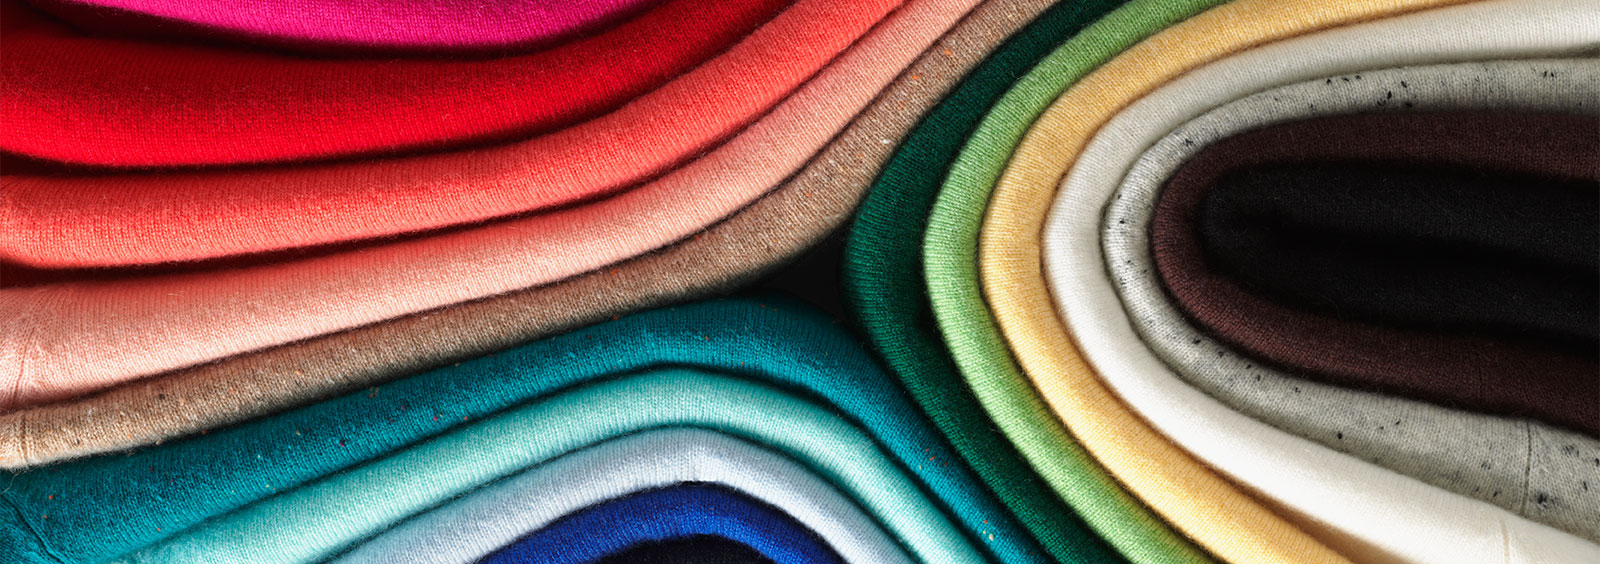 Why You Should Treat Yourself to a Cashmere Sweater